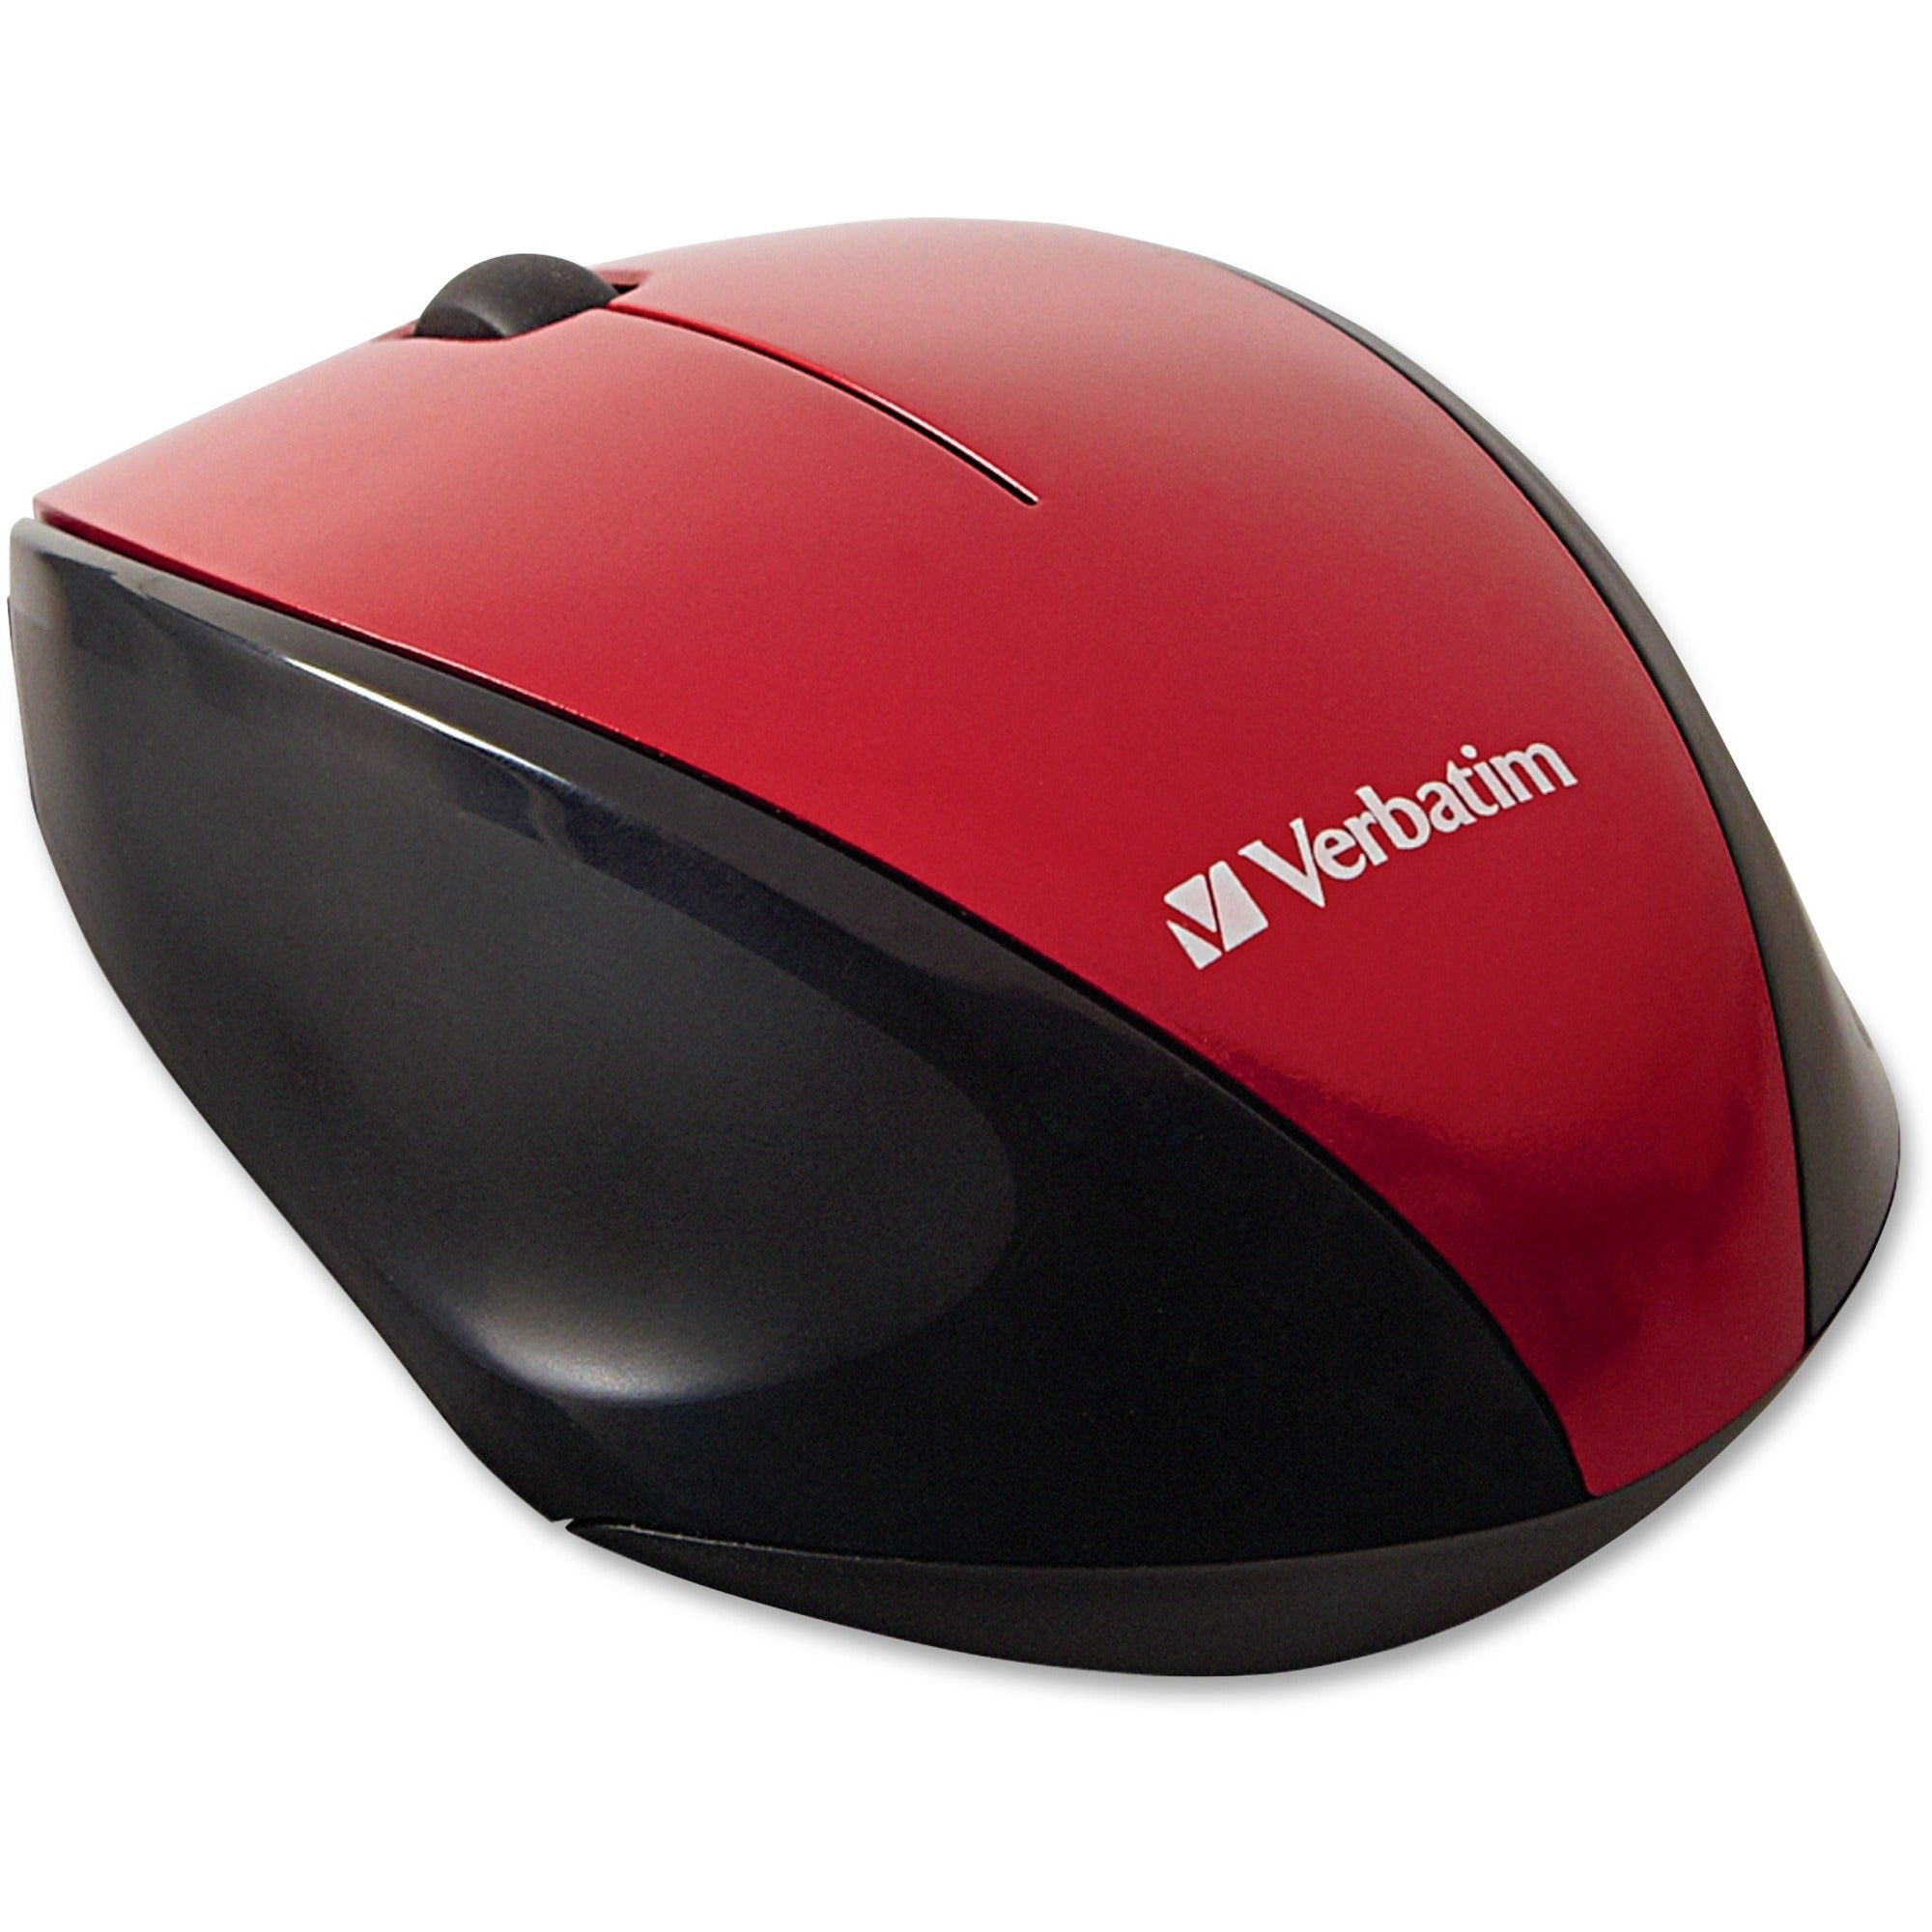 Verbatim Wireless Notebook Multi-Trac Blue LED Mouse - Red - Blue Optical - Wireless - Radio Frequency - Red - USB 2.0 - Scroll Wheel - 2 Button(s) - 